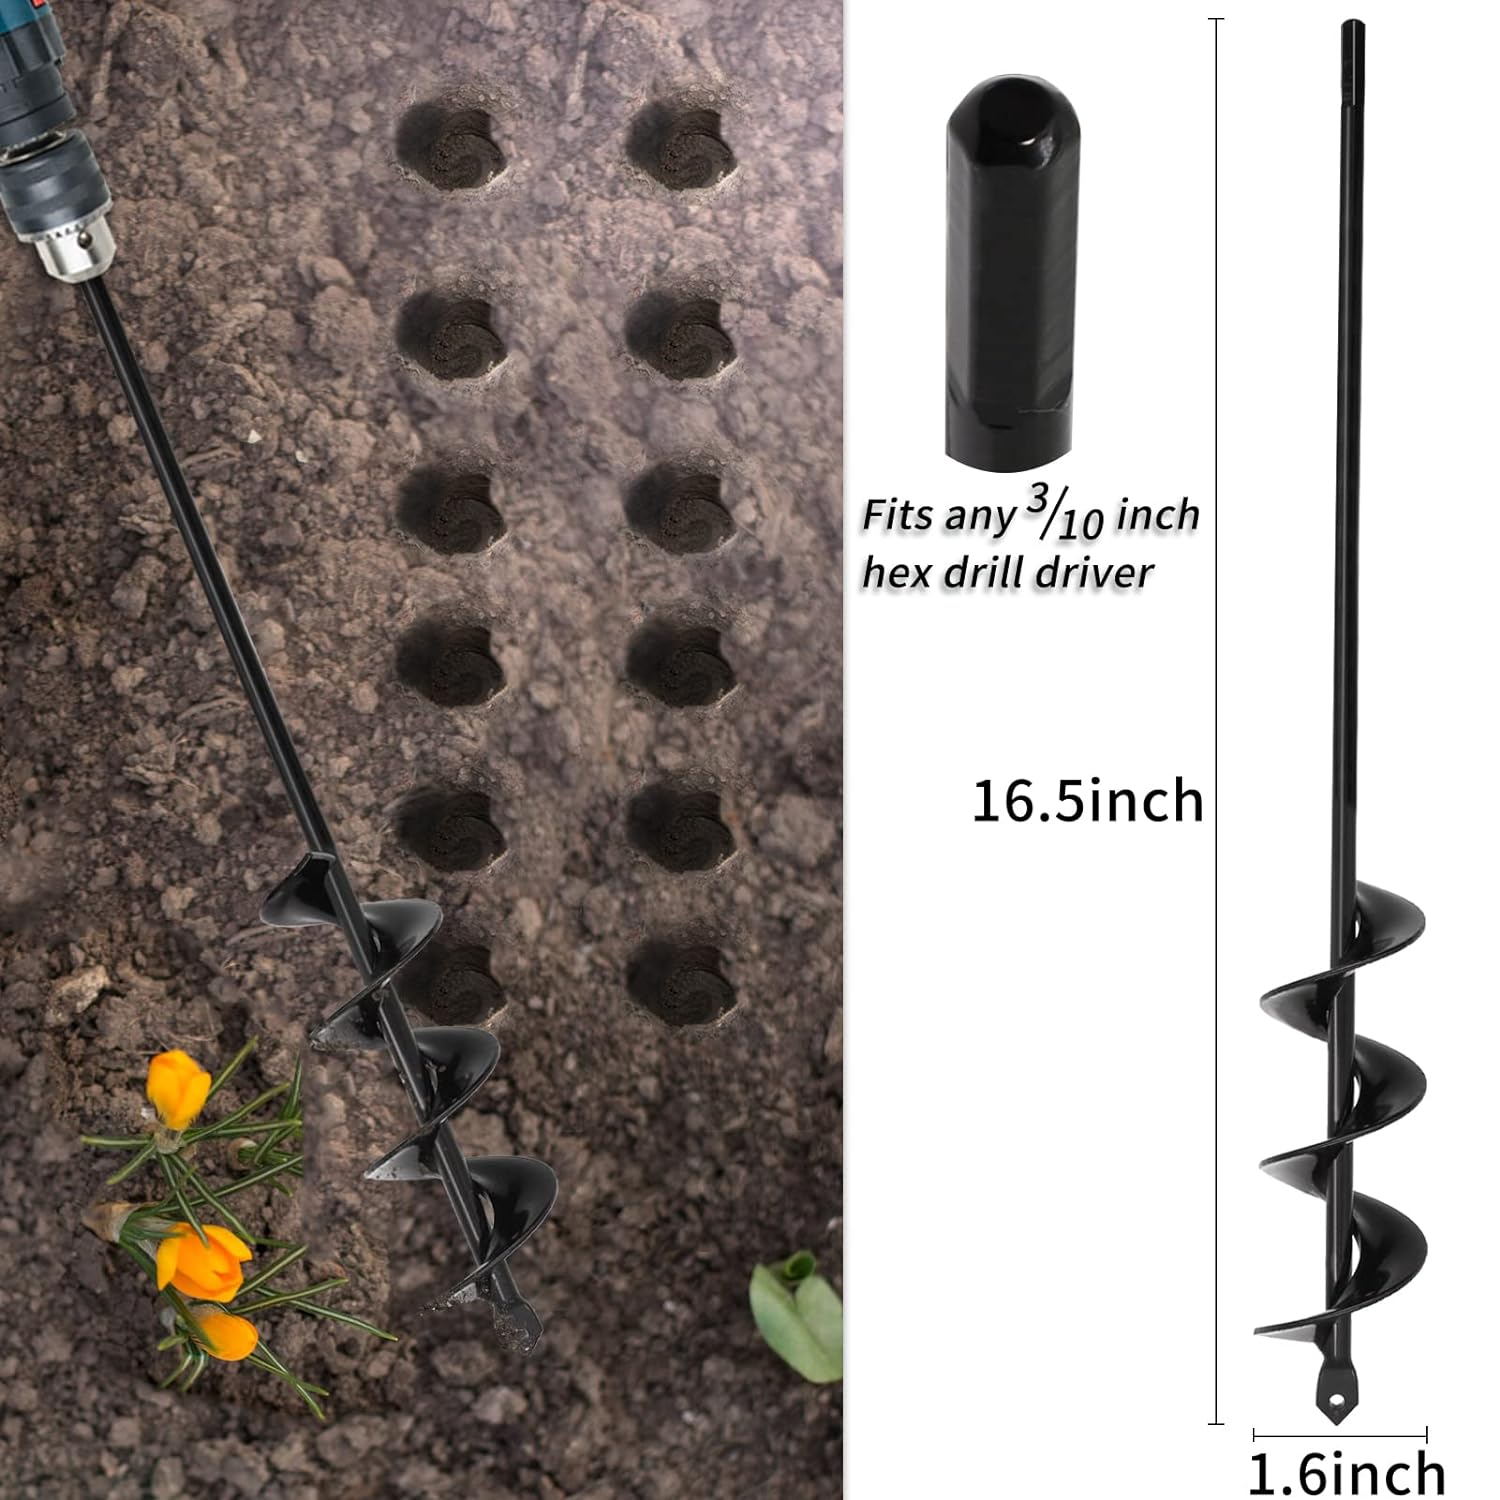 Generic Auger Drill Bit for Planting 1.6x16.5inch Extended Length Garden Auger Spiral Drill Bit for Planting Bulbs Flowers Planting Aug